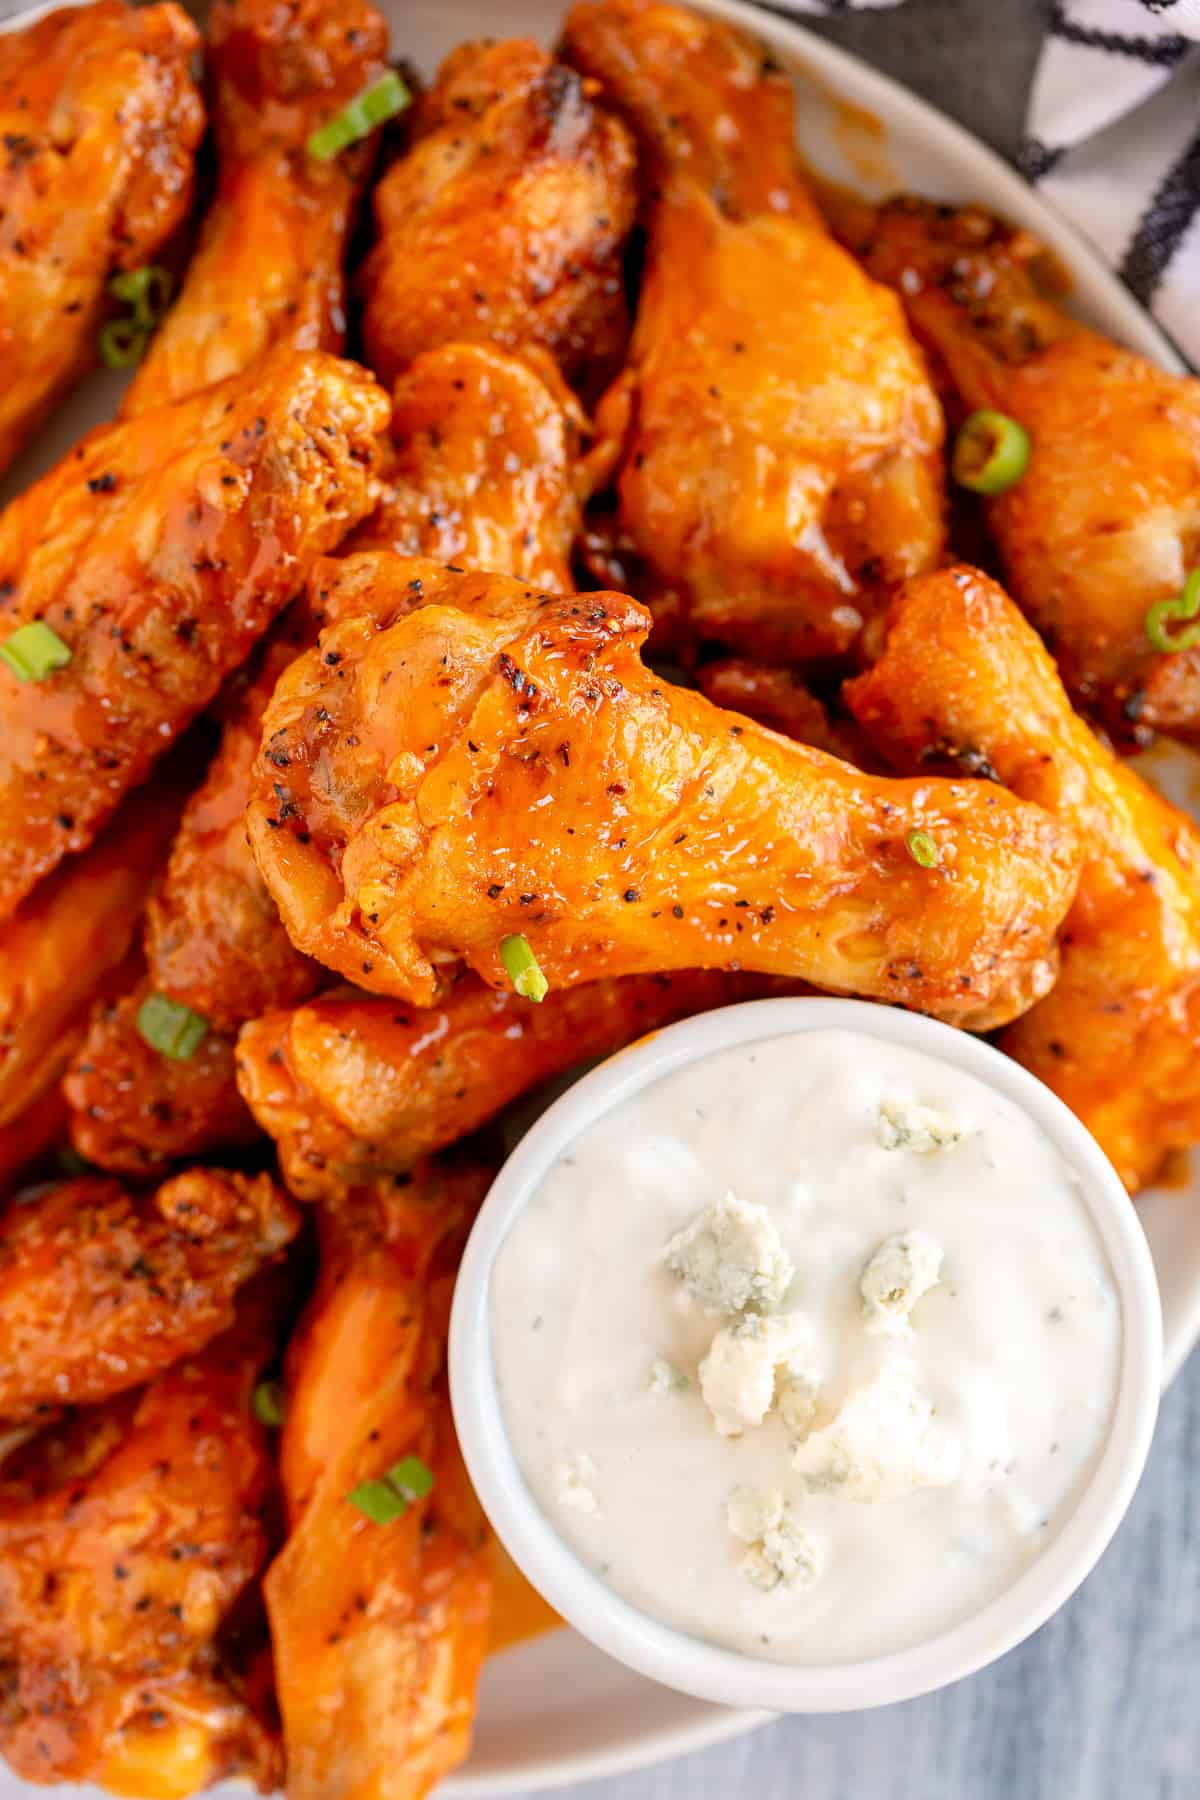 An over the top shot of Buffalo chicken wings and a small bowl of blue cheese ranch dip.